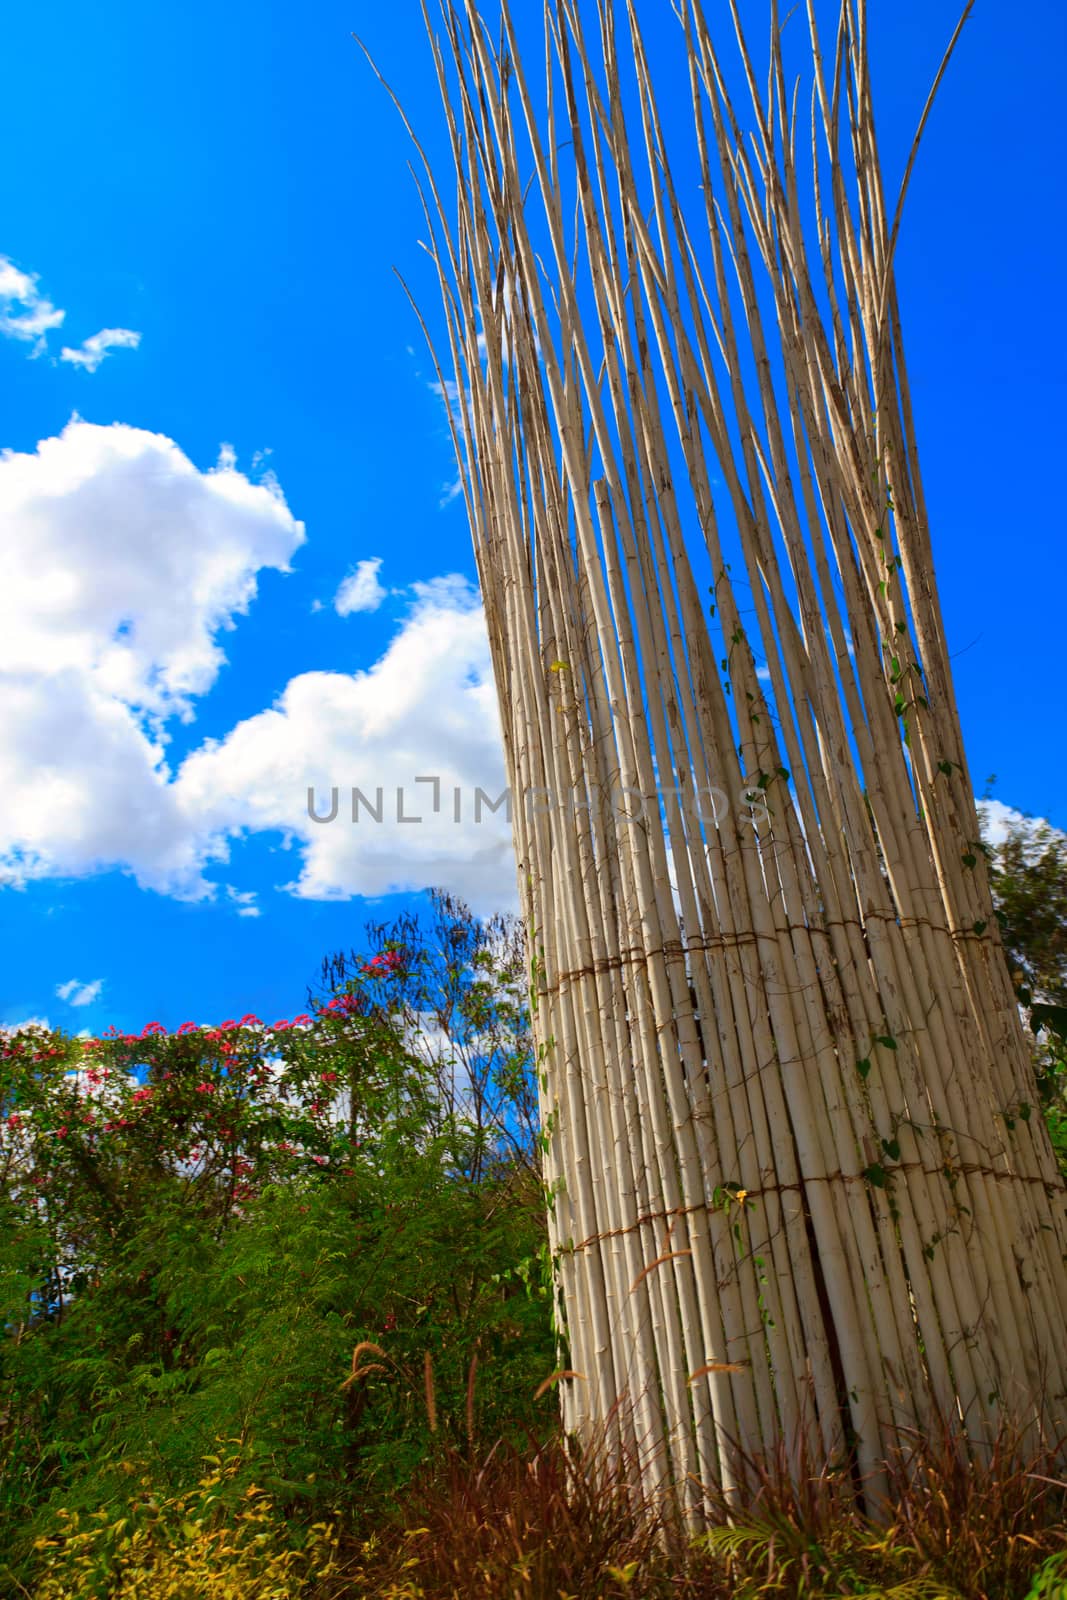 Bamboo trees grow up to blue sky and cross each other.